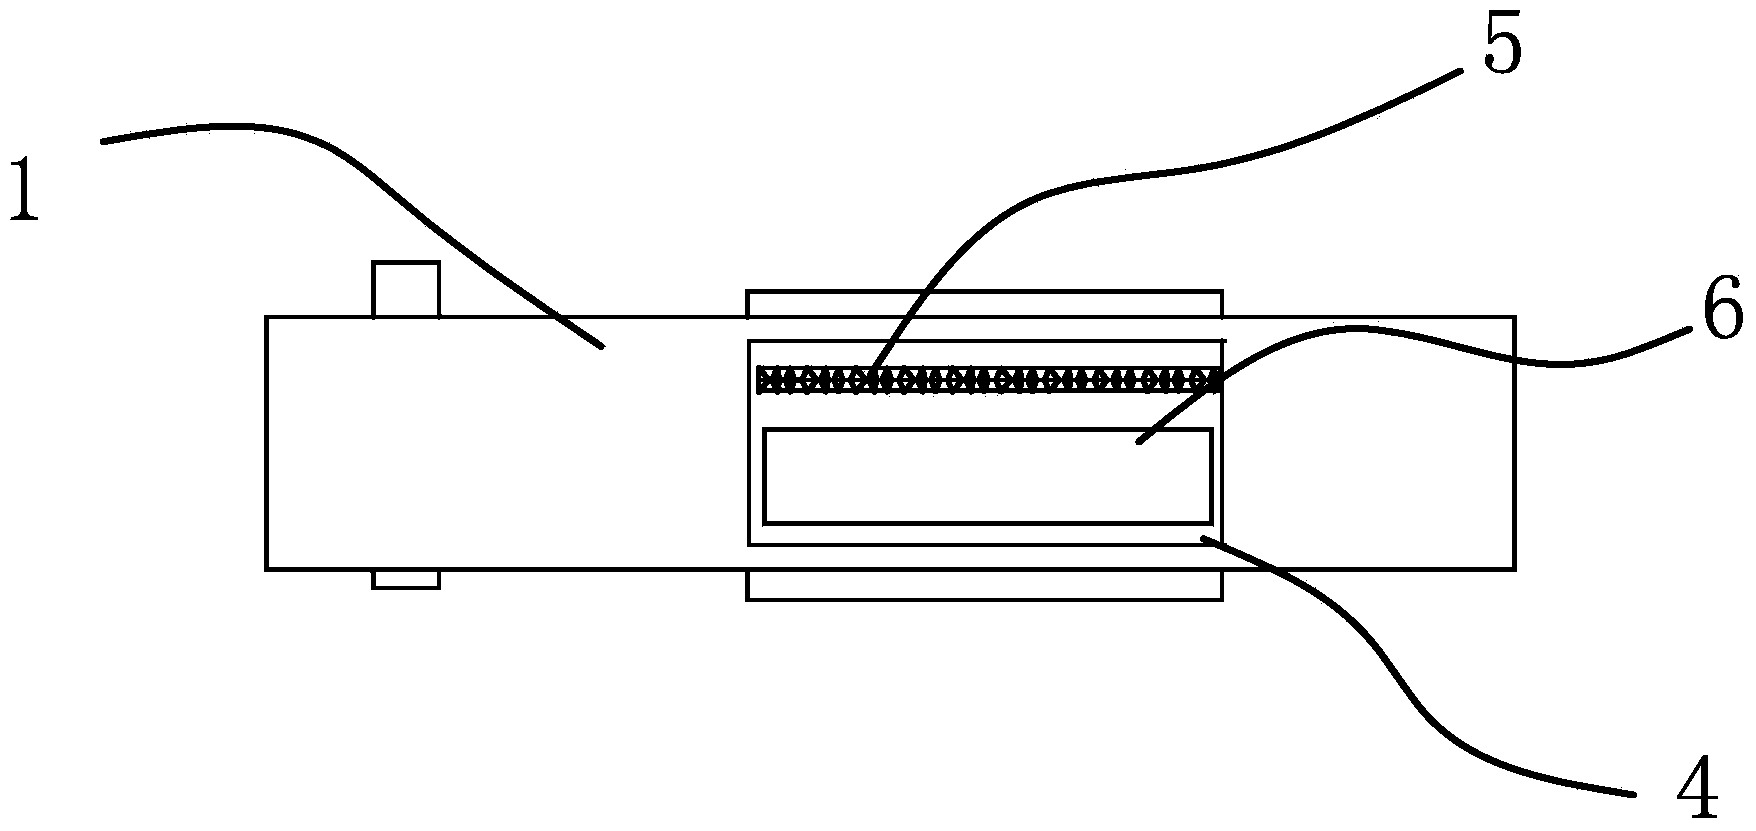 Pet collar provided with positioning device